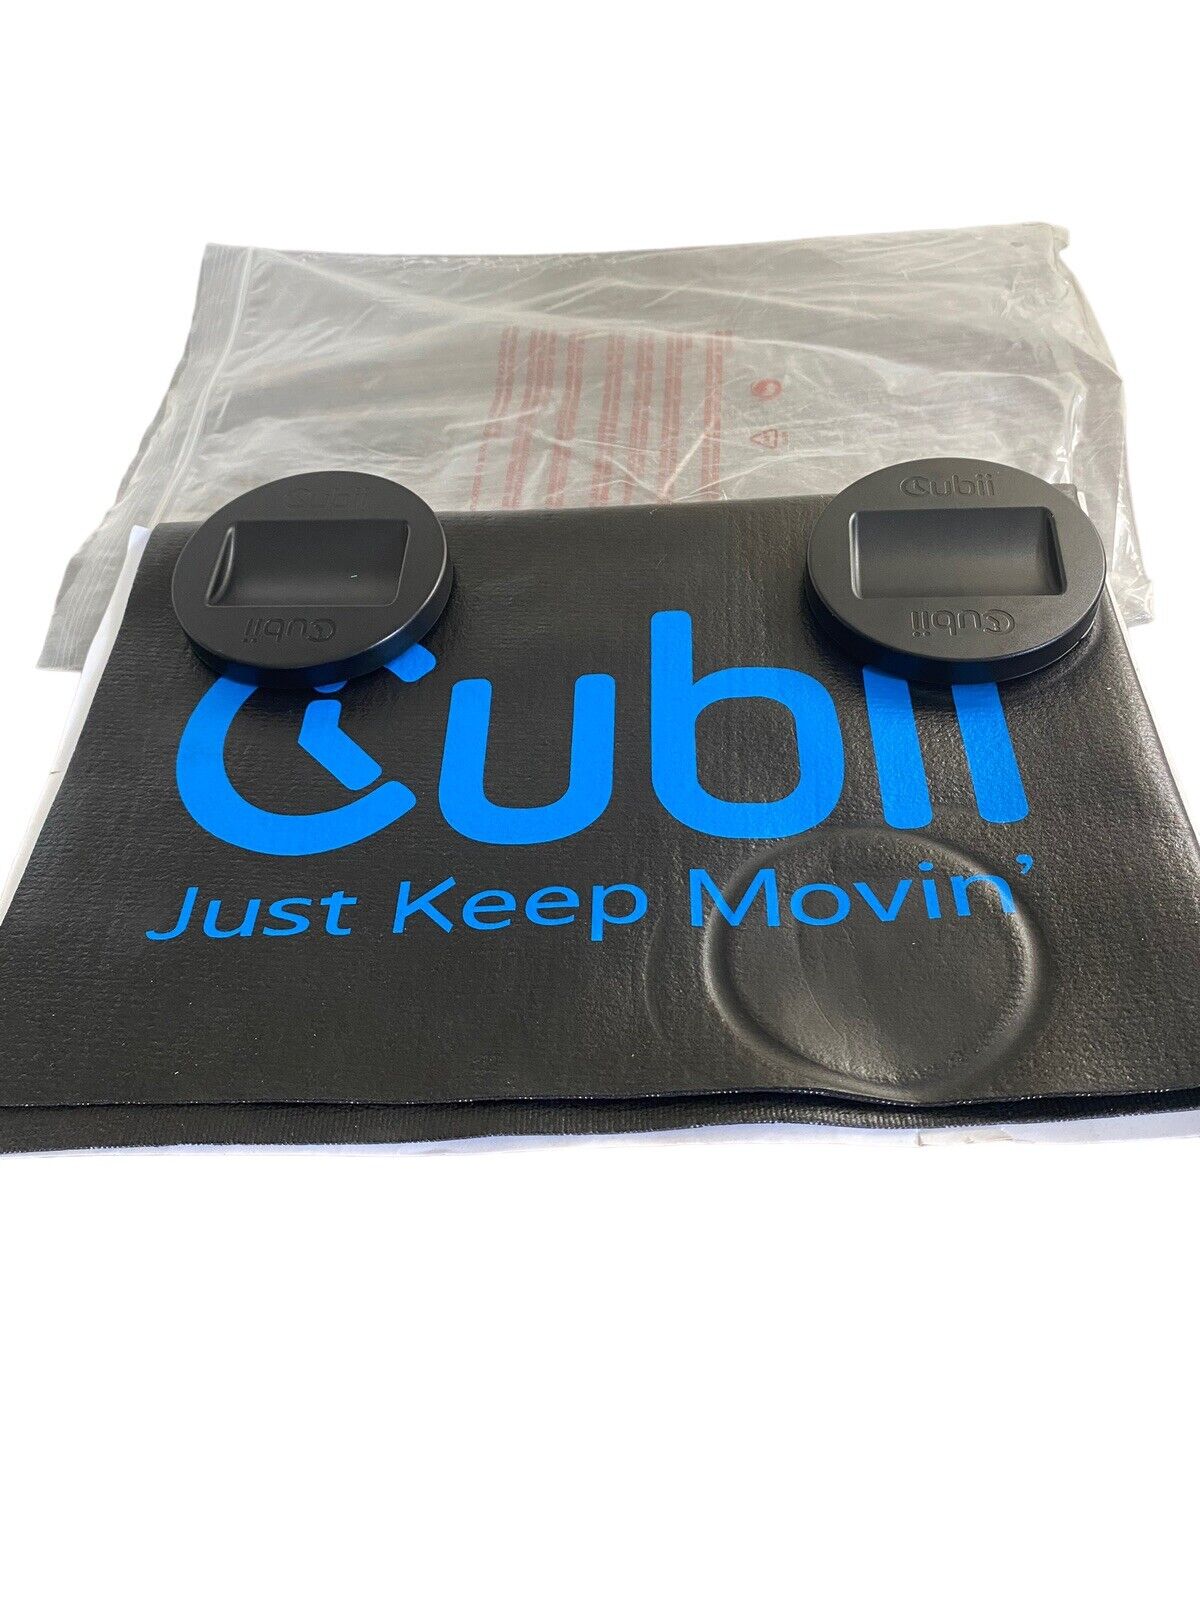 Cubii Seated Elliptical Mat and Wheel Stoppers